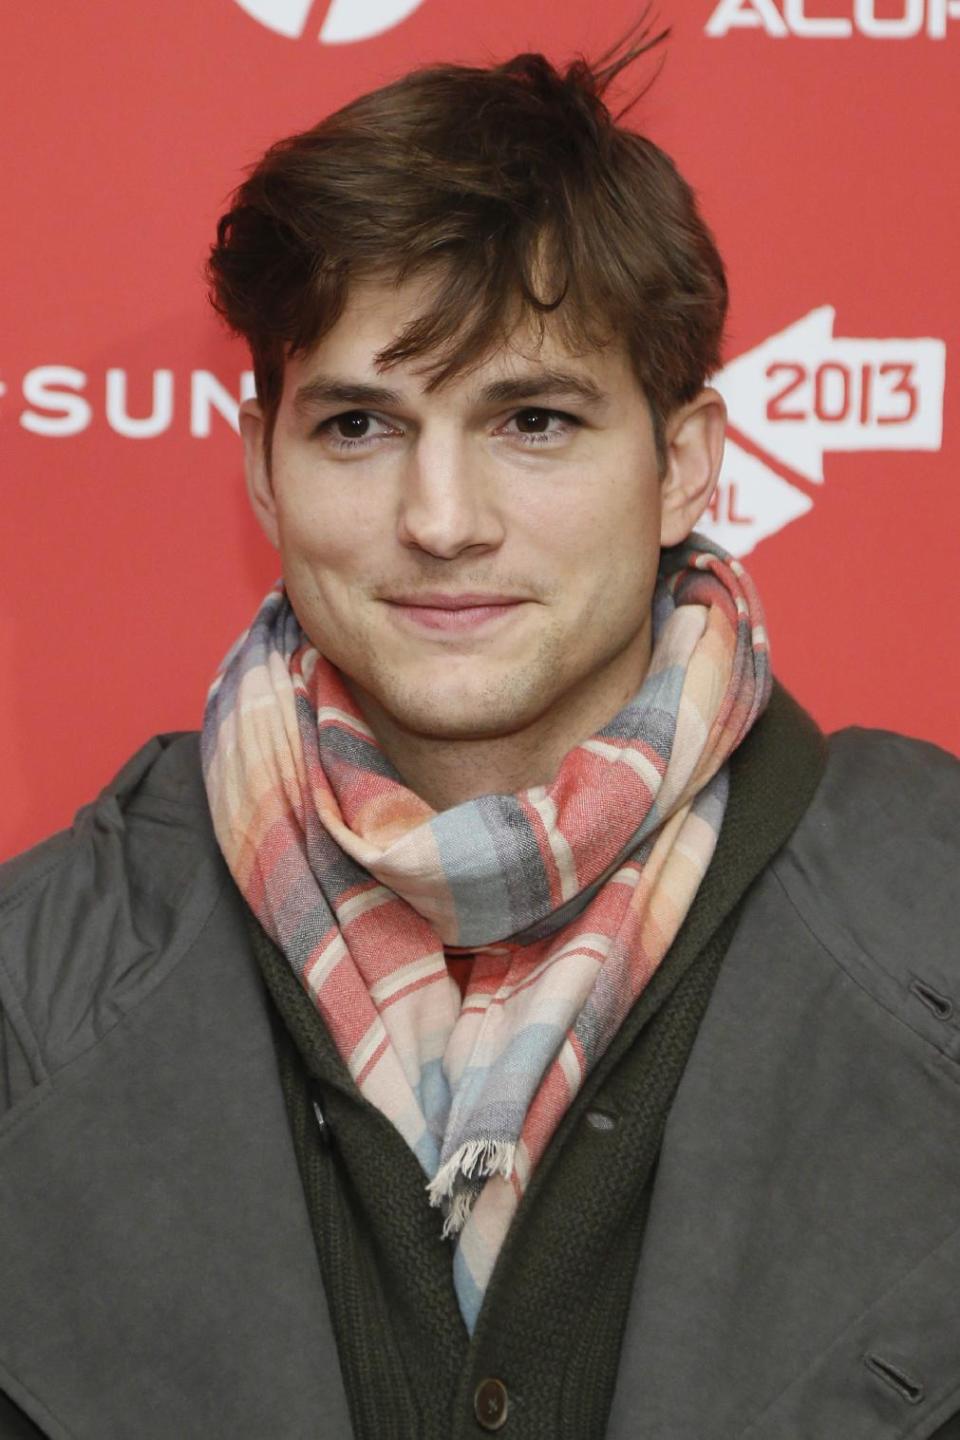 File - In this Jan. 25, 2013 file photo, actor Ashton Kutcher, who portrays Apple's Steve Jobs in the film "jOBS," poses at its premiere during the 2013 Sundance Film Festival, in Park City, Utah. Los Angeles prosecutors say a 12-year-old boy admitted Monday, March 11, 2013, to making prank 911 calls that drew a large police response to Kutcher's home last year. The boy, who has not been publicly identified, will be sentenced at a later date. (Photo by Danny Moloshok/Invision/AP, File)